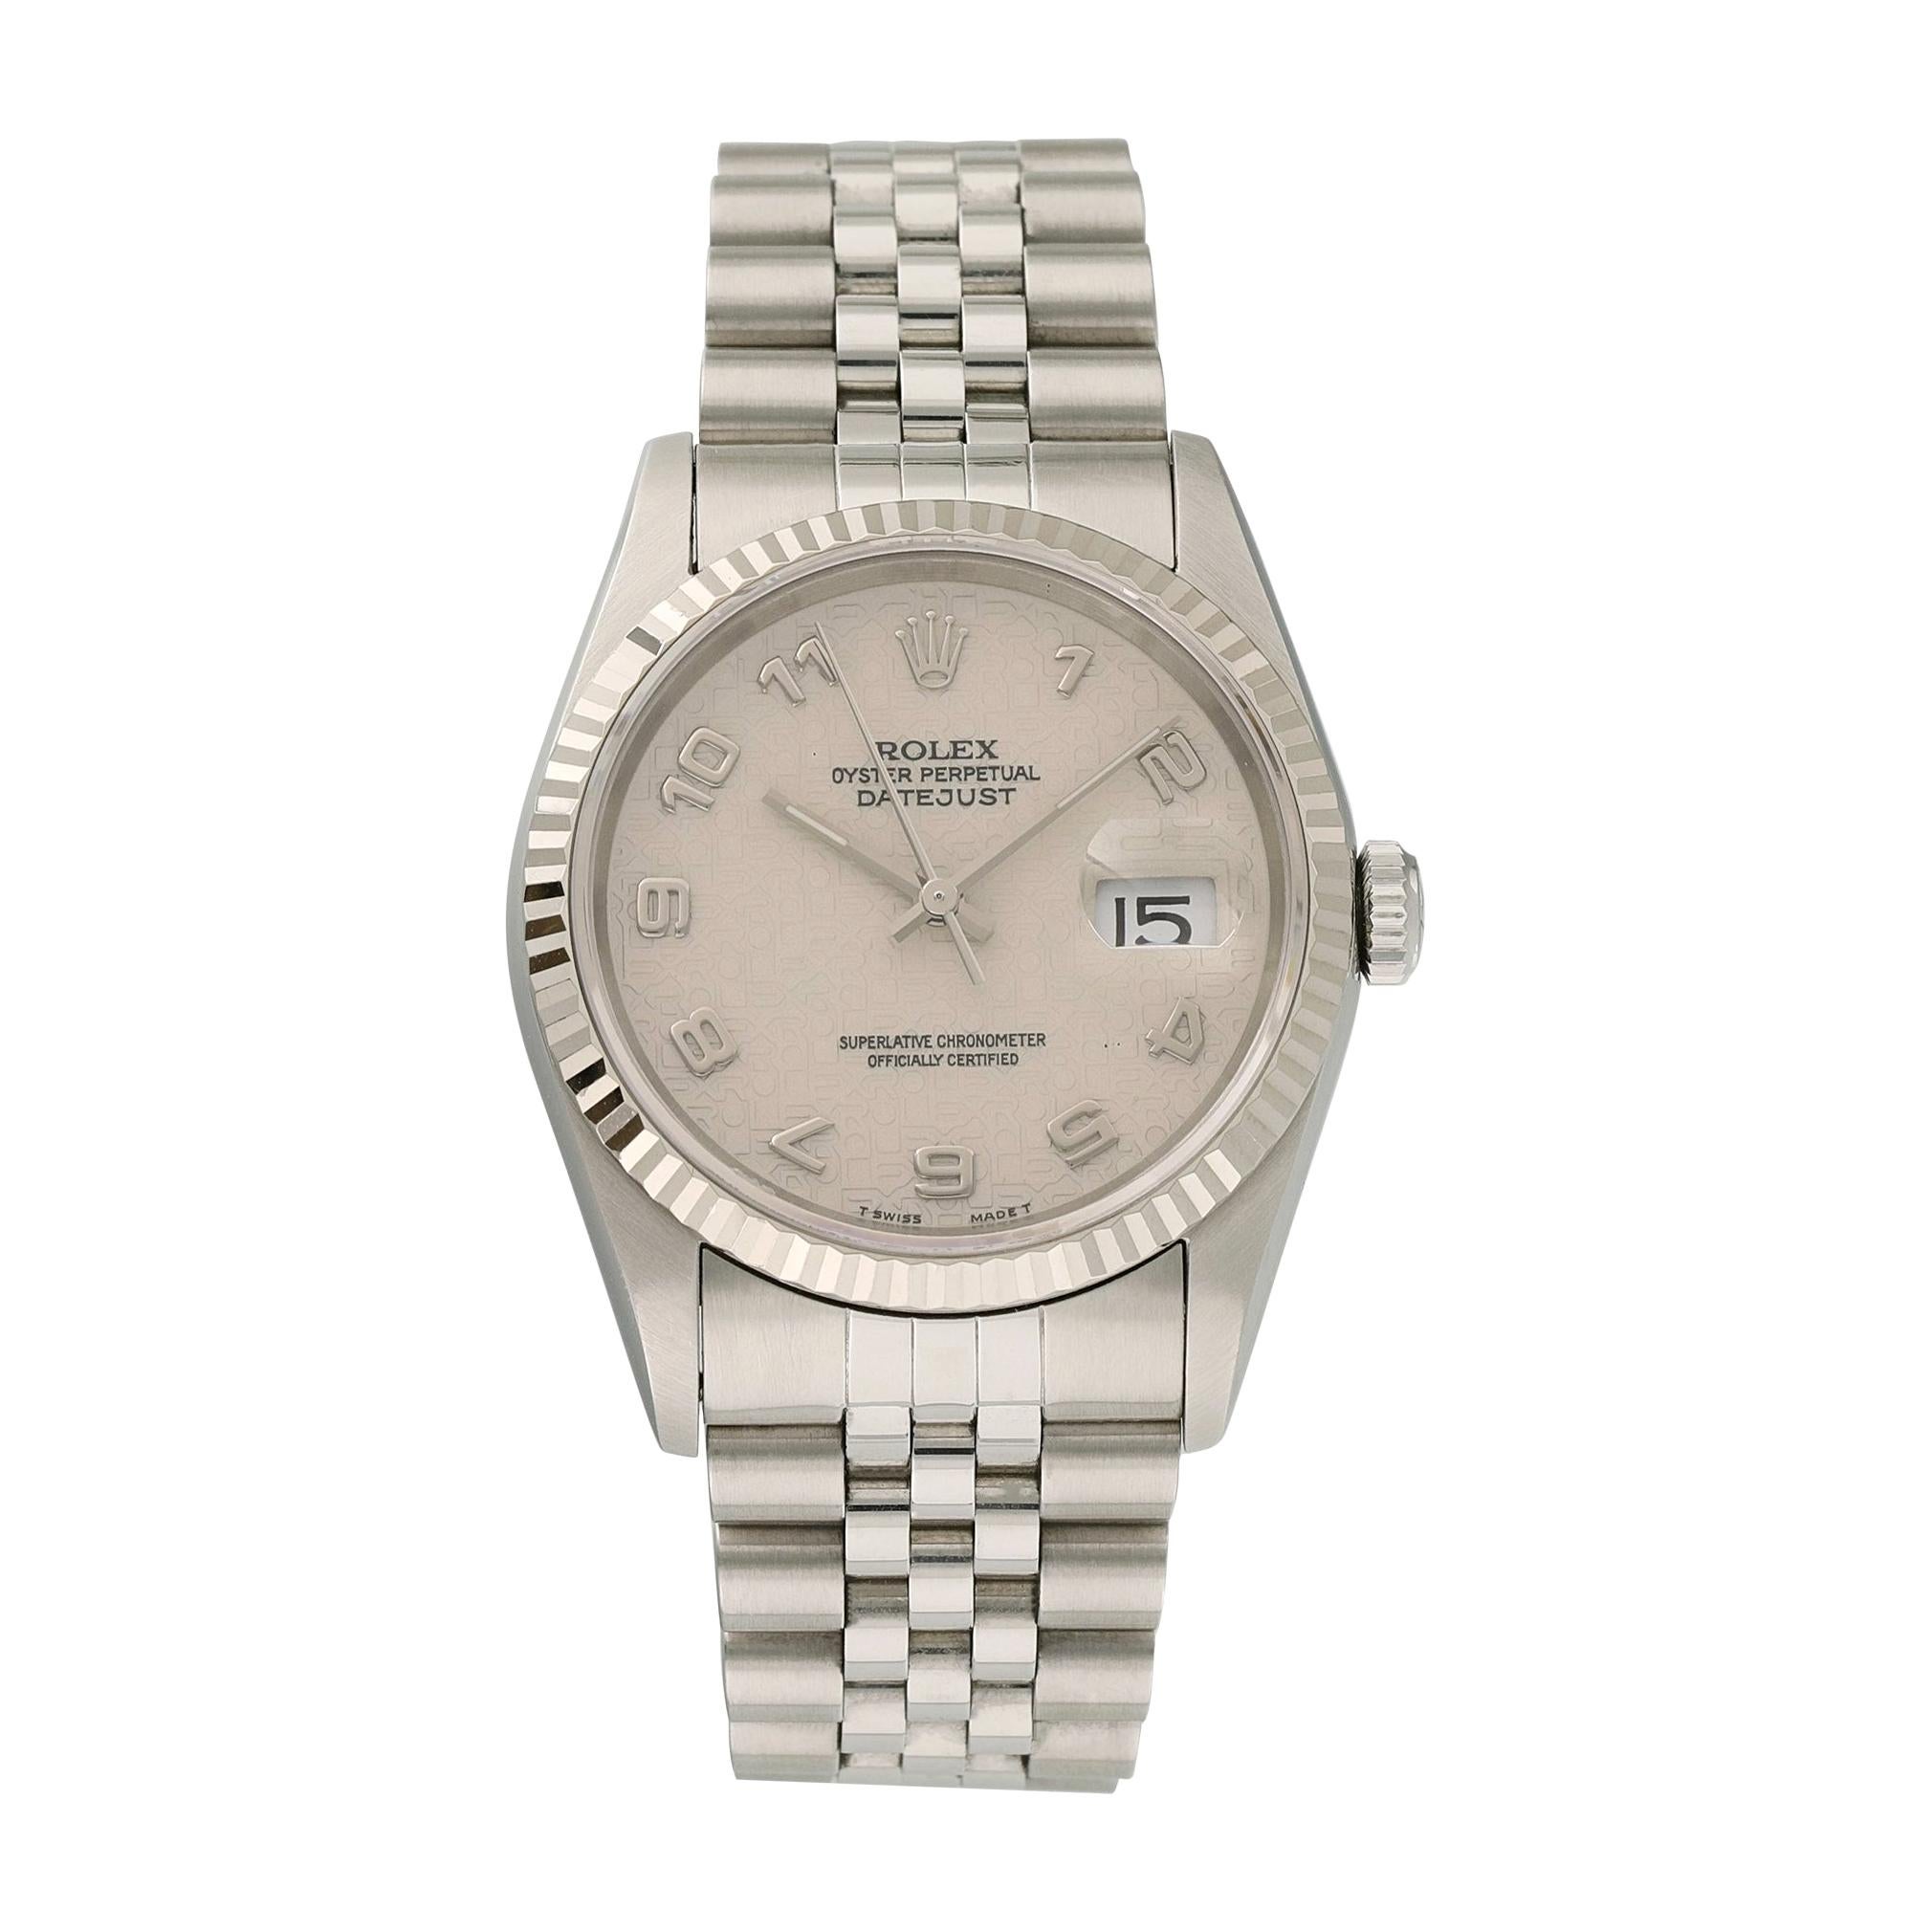 Rolex Oyster Perpetual Datejust 16234 Rolex Dial Men's Watch For Sale